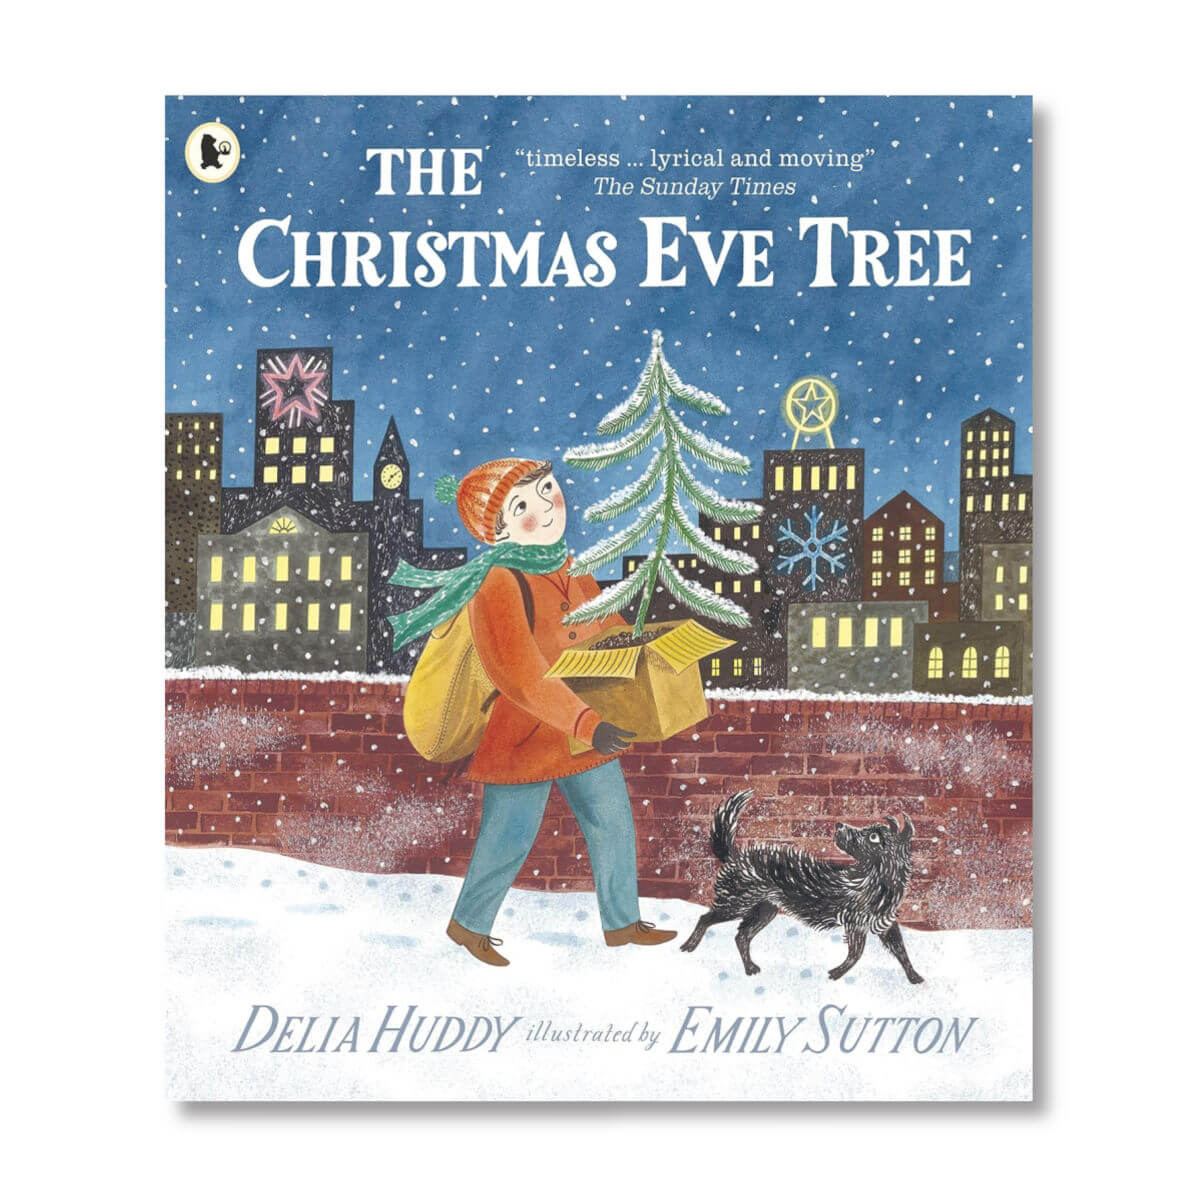 the christmas eve tree children's book by delia huddy illustratd by emily sutton